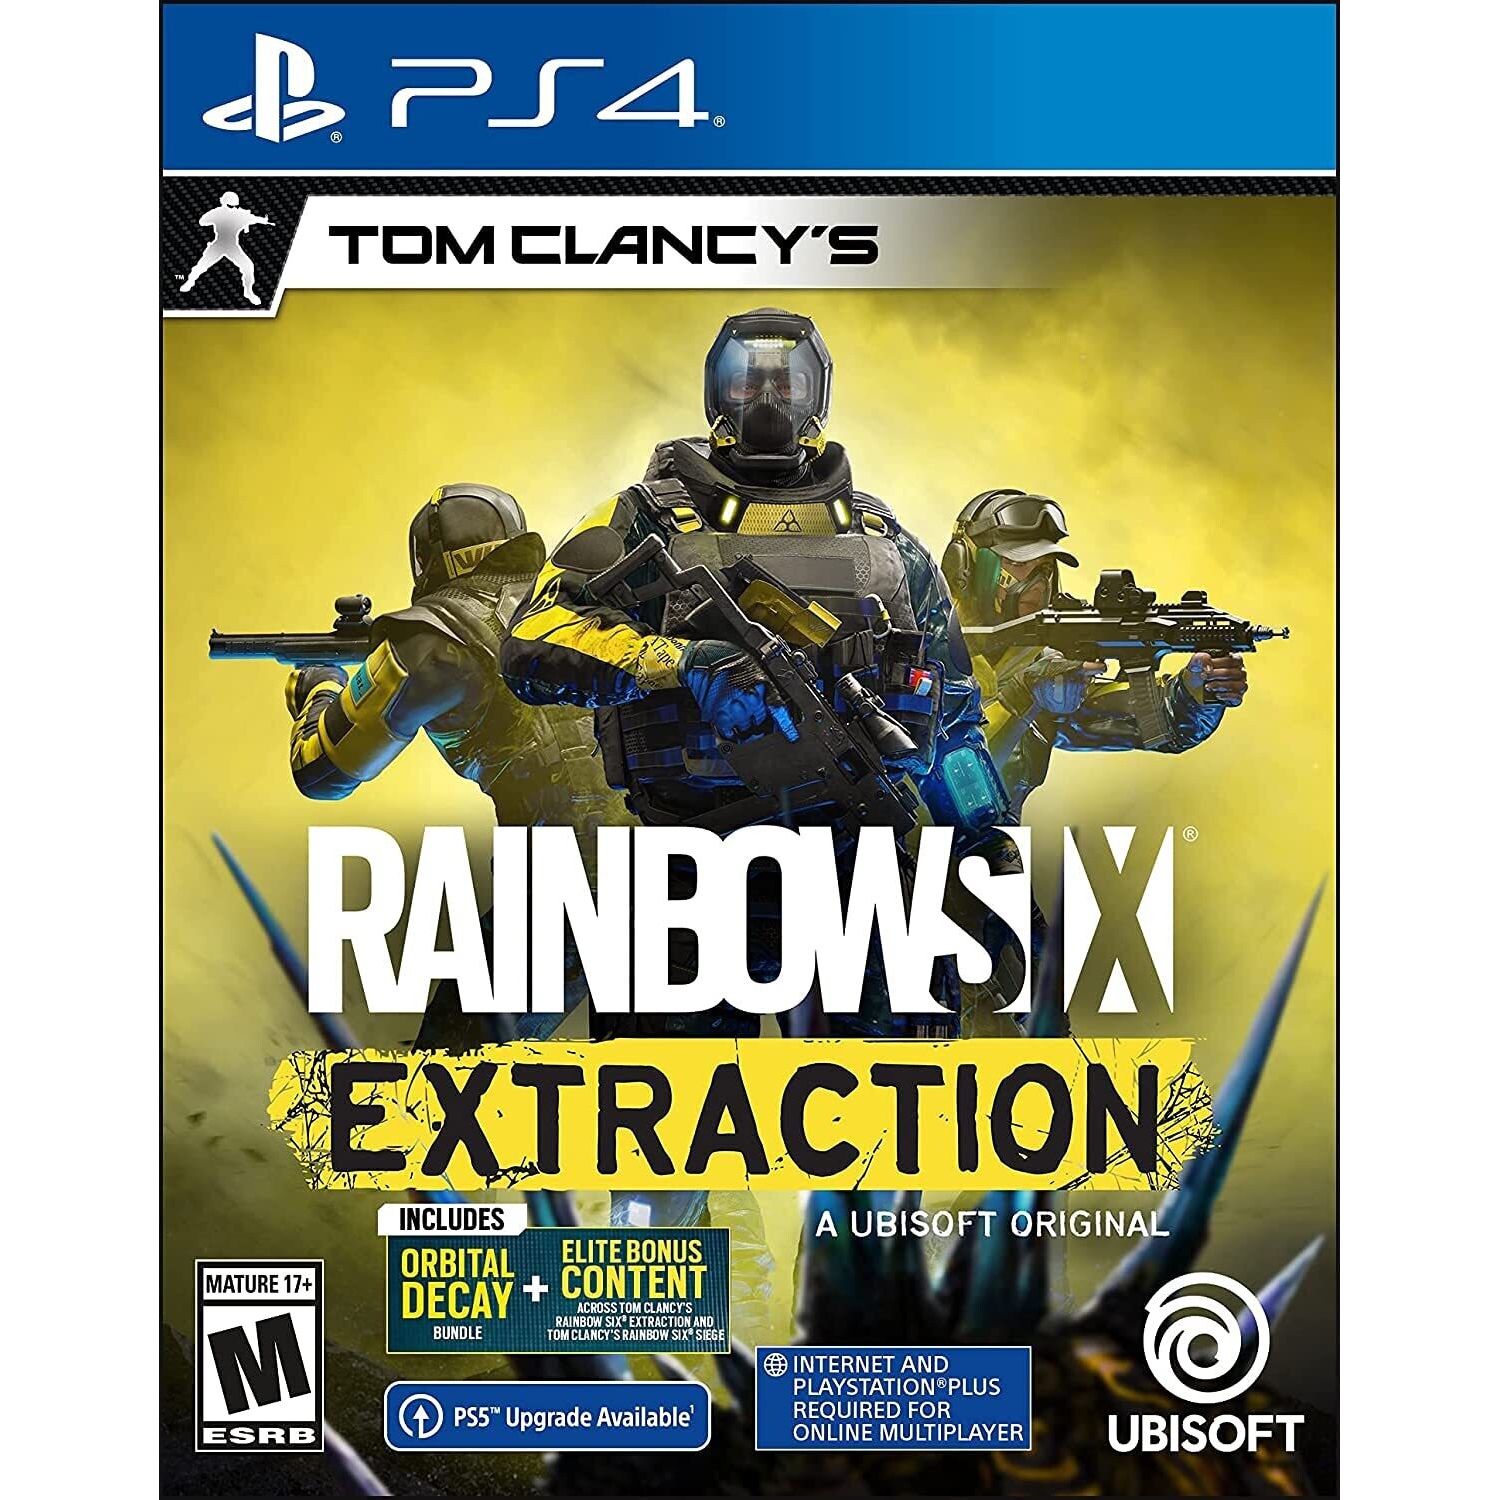 Tom Clancy's Rainbow Six Extraction Standard Edition for PlayStation 4 [VIDEOGAMES] PS 4